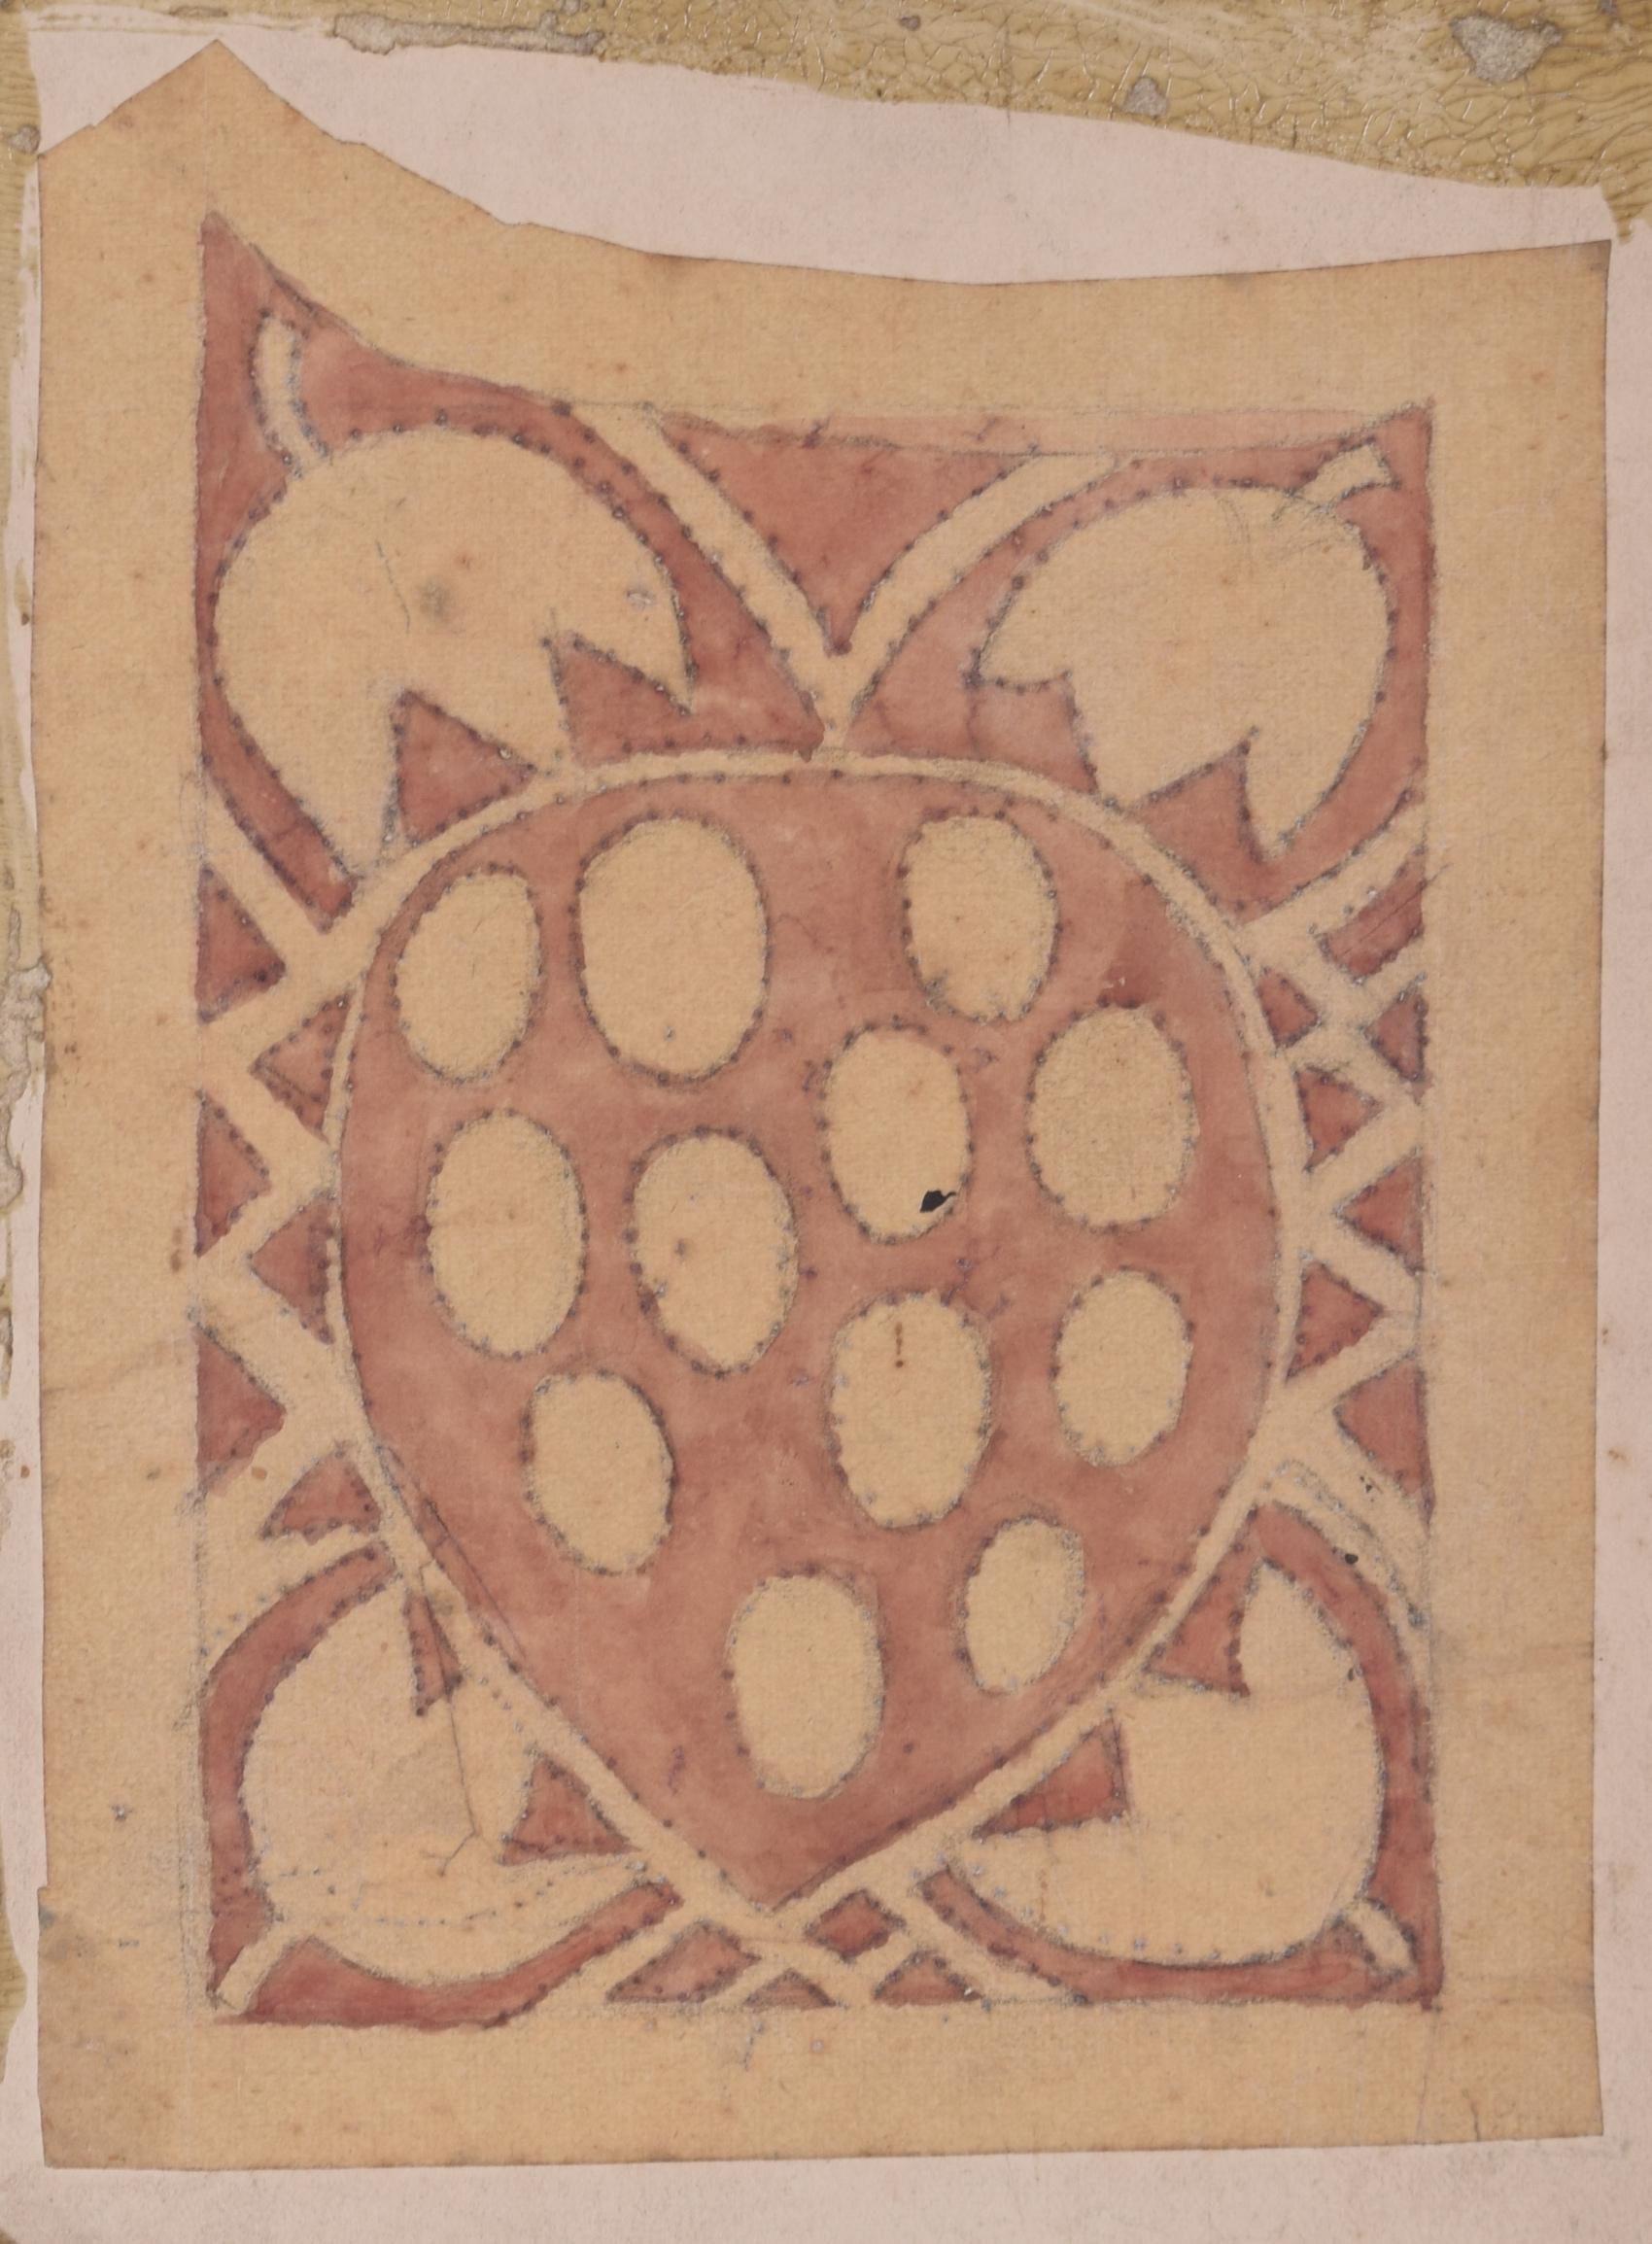 Reginald Hallward (1858-1948)
Design for a banner in the shape of a strawberry
Watercolour
14 x 10 cm

A design for a banner featuring a strawberry motif. The design, like many others by Hallward, is likely influenced by in the Arts and Crafts style